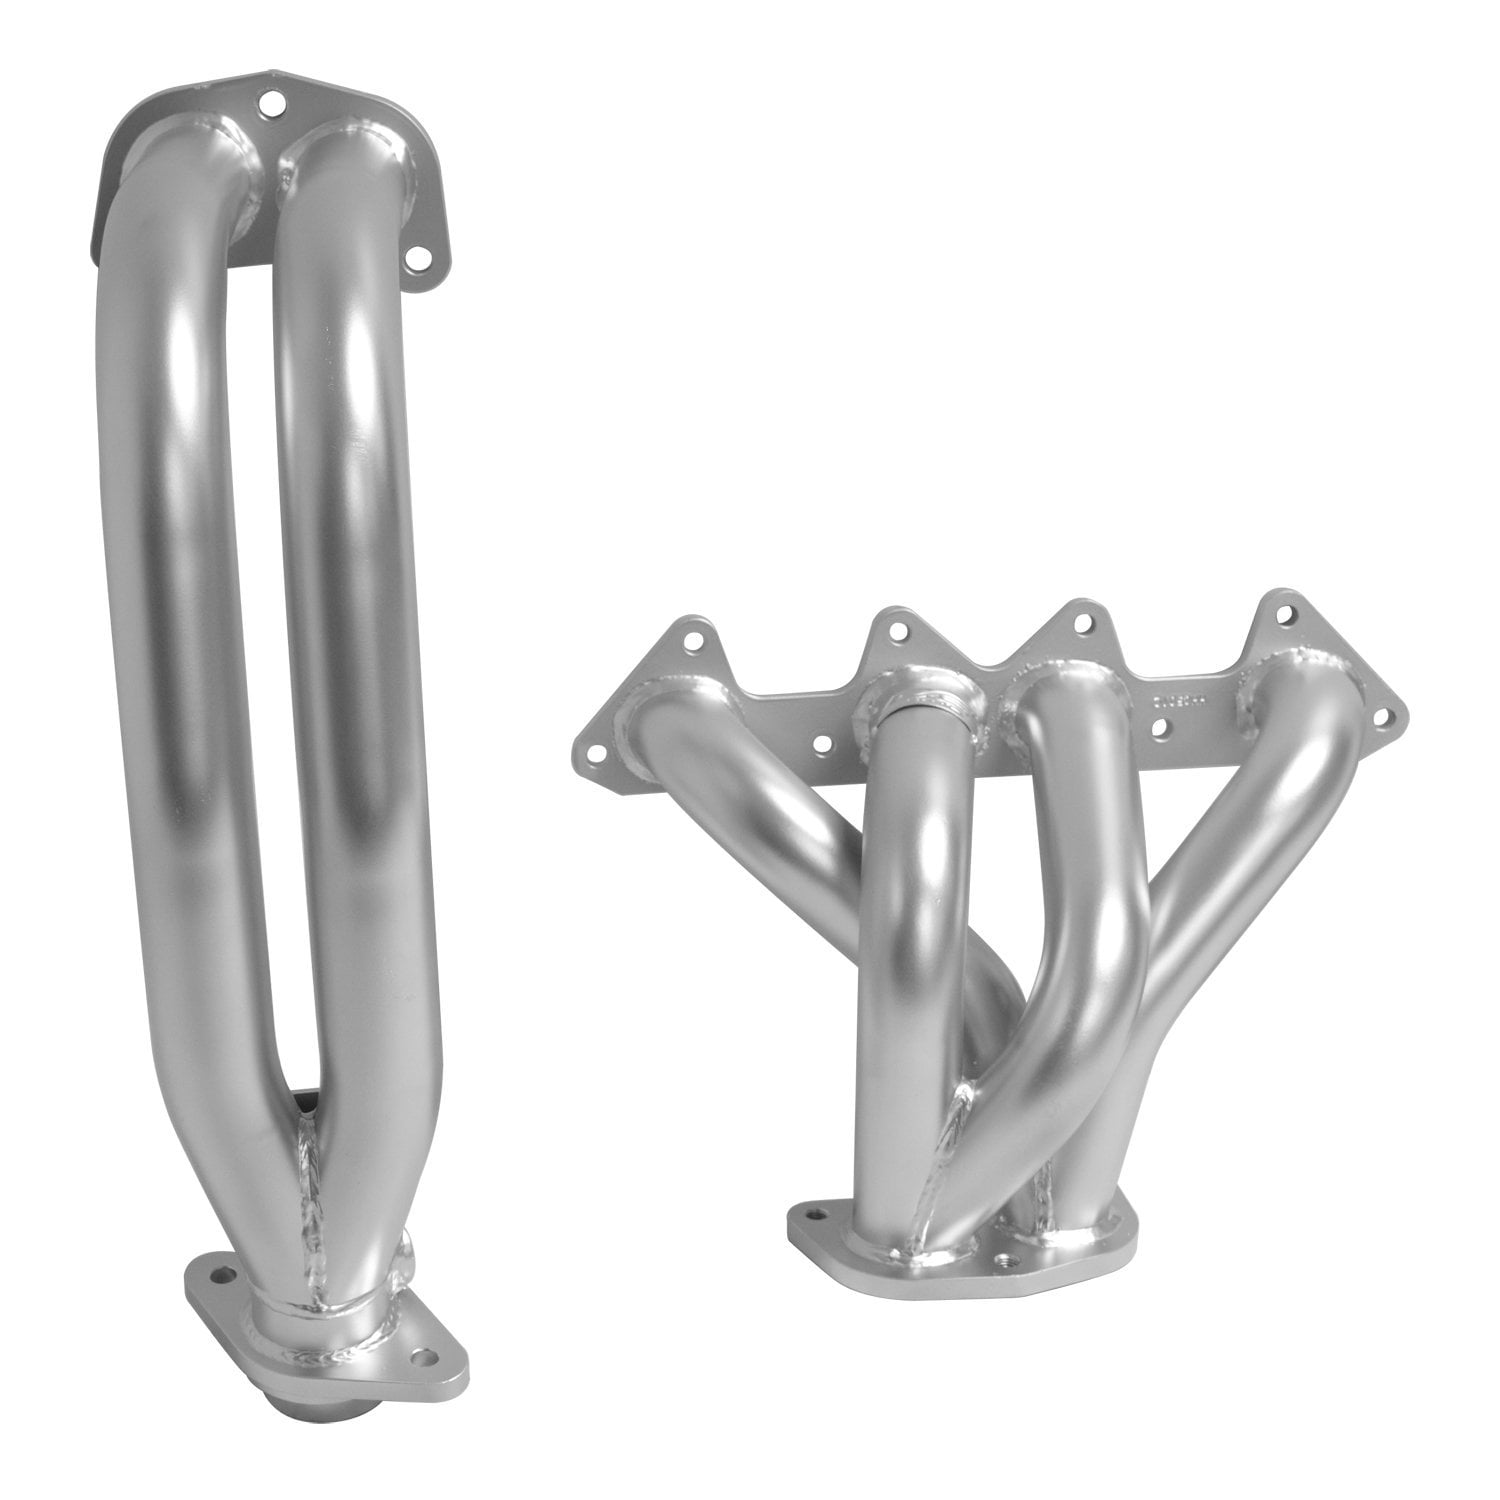 2 Piece DC Sports HHC5011 4-2-1 Header with Ceramic Coating Silver 